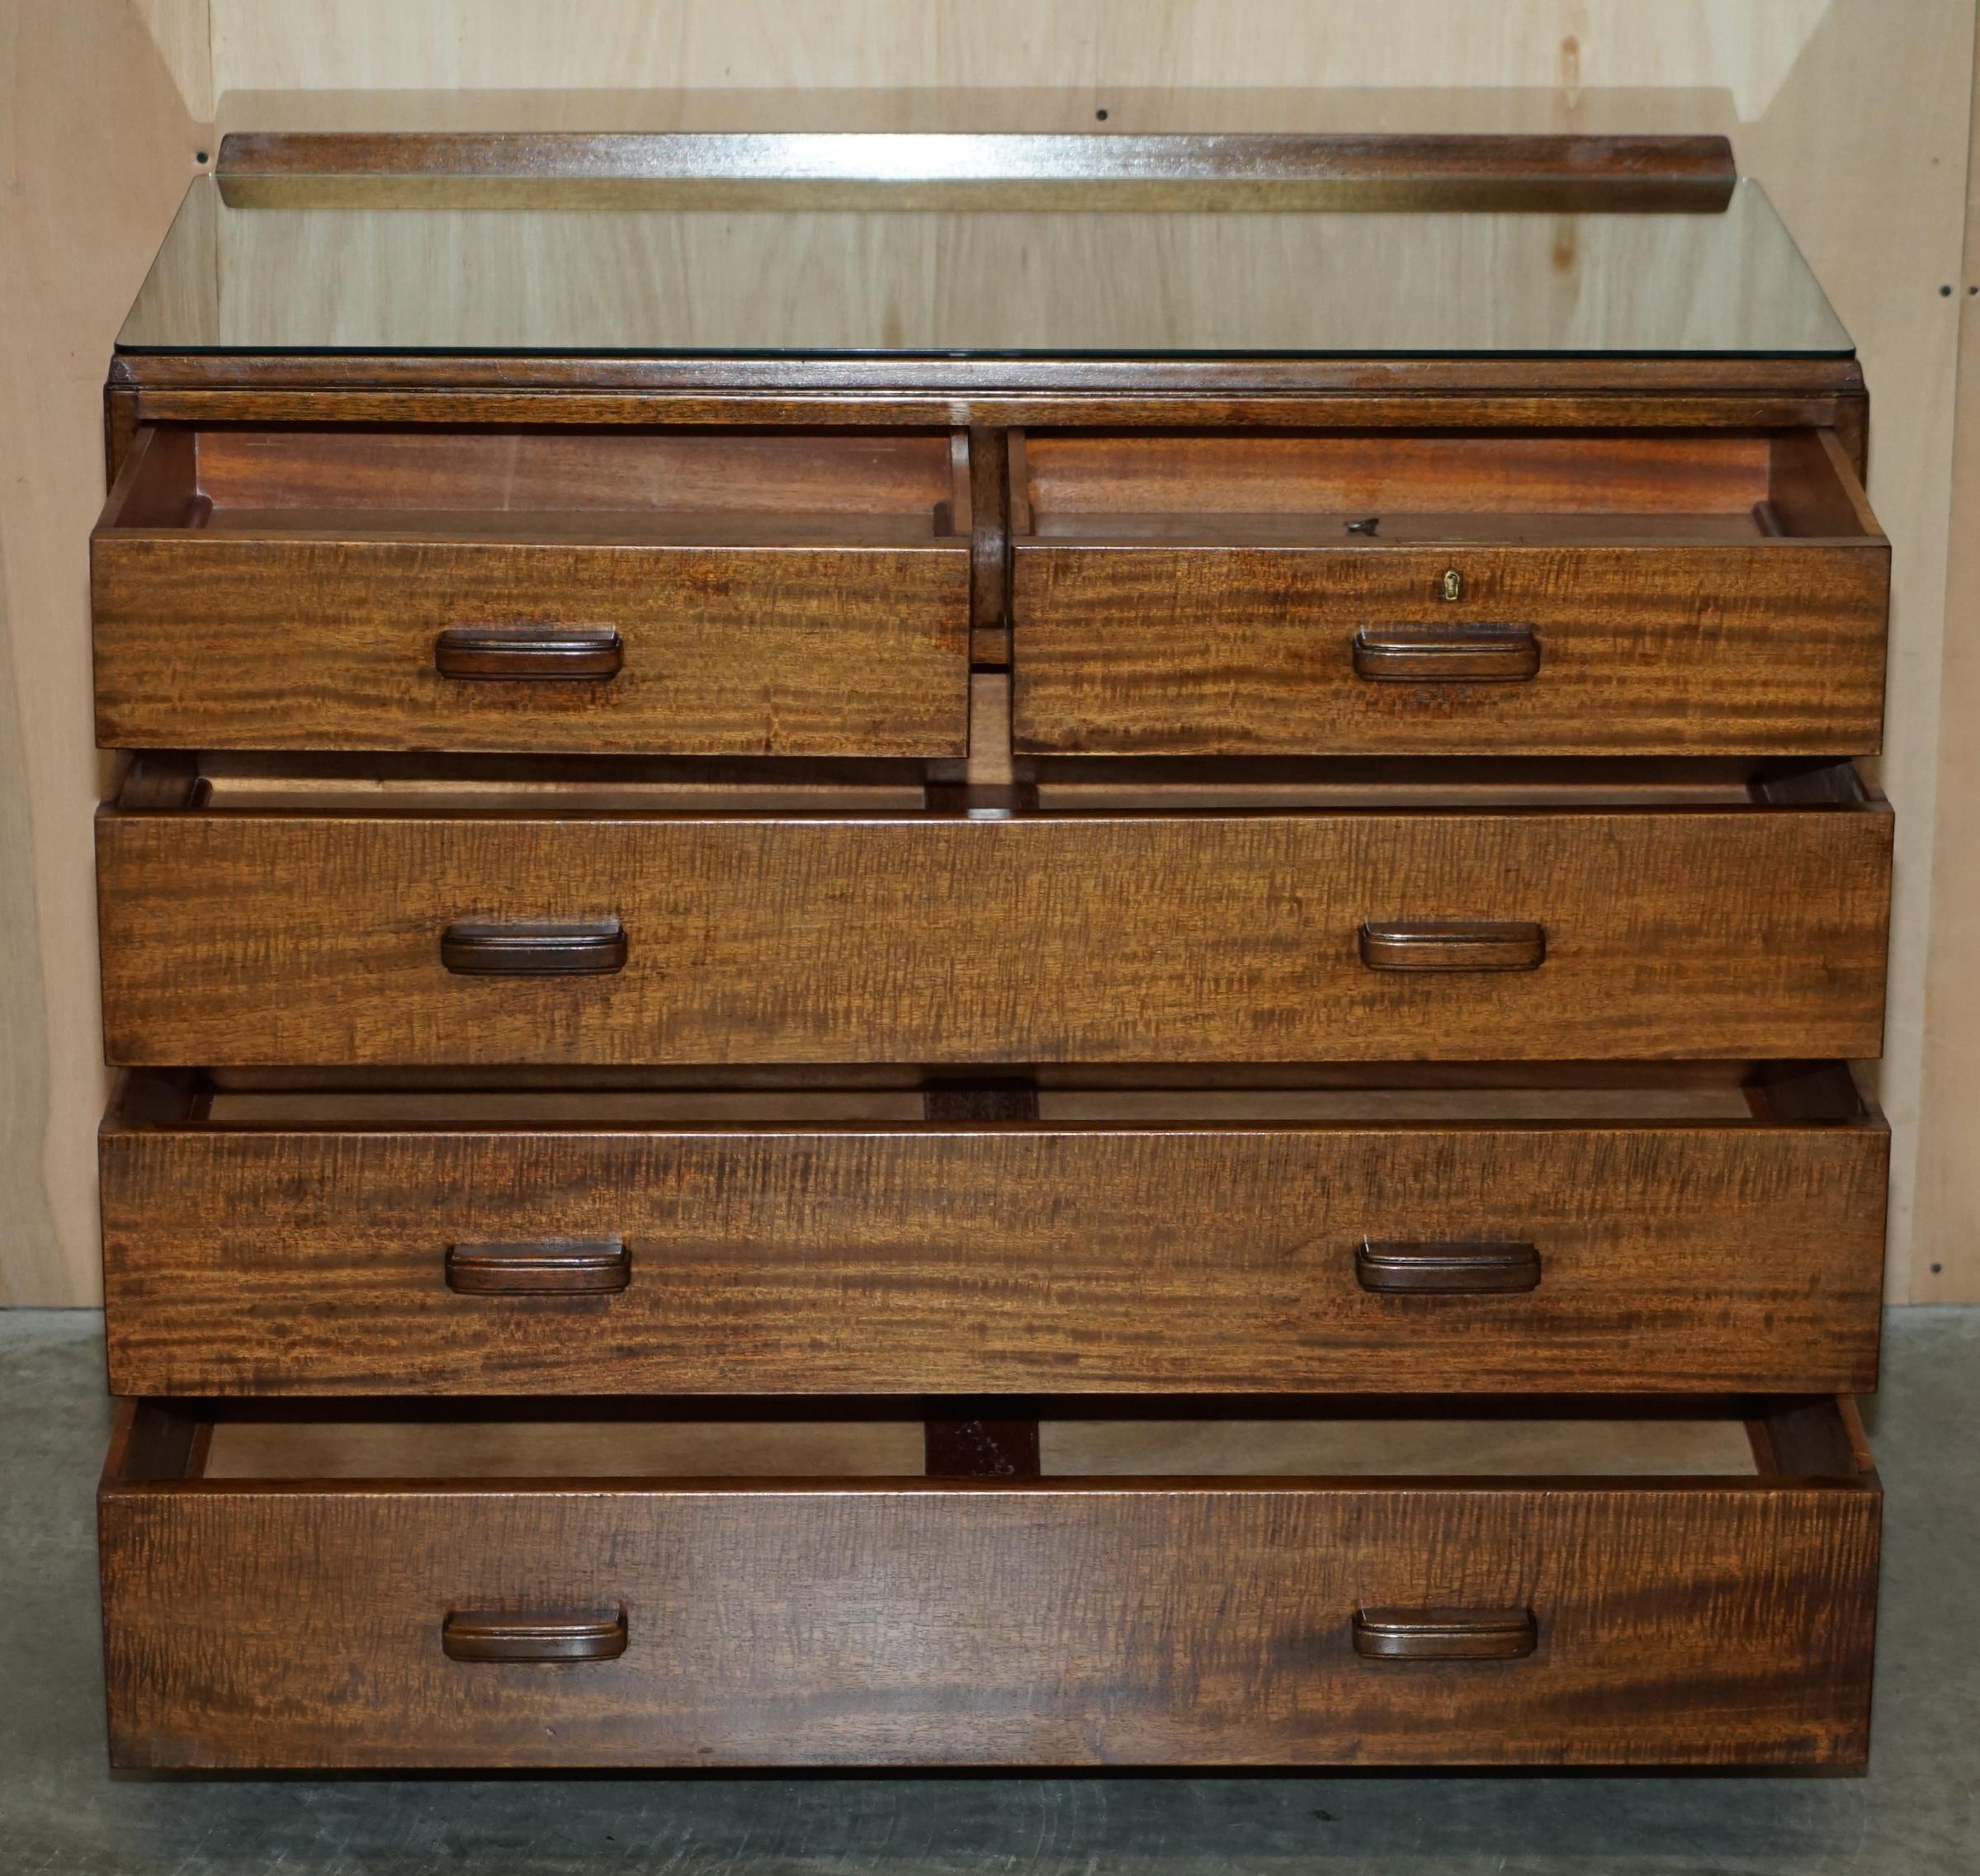 Alfred COX Mid-Century Modern Chests of Drawers Circa 1952 English Oak For Sale 6